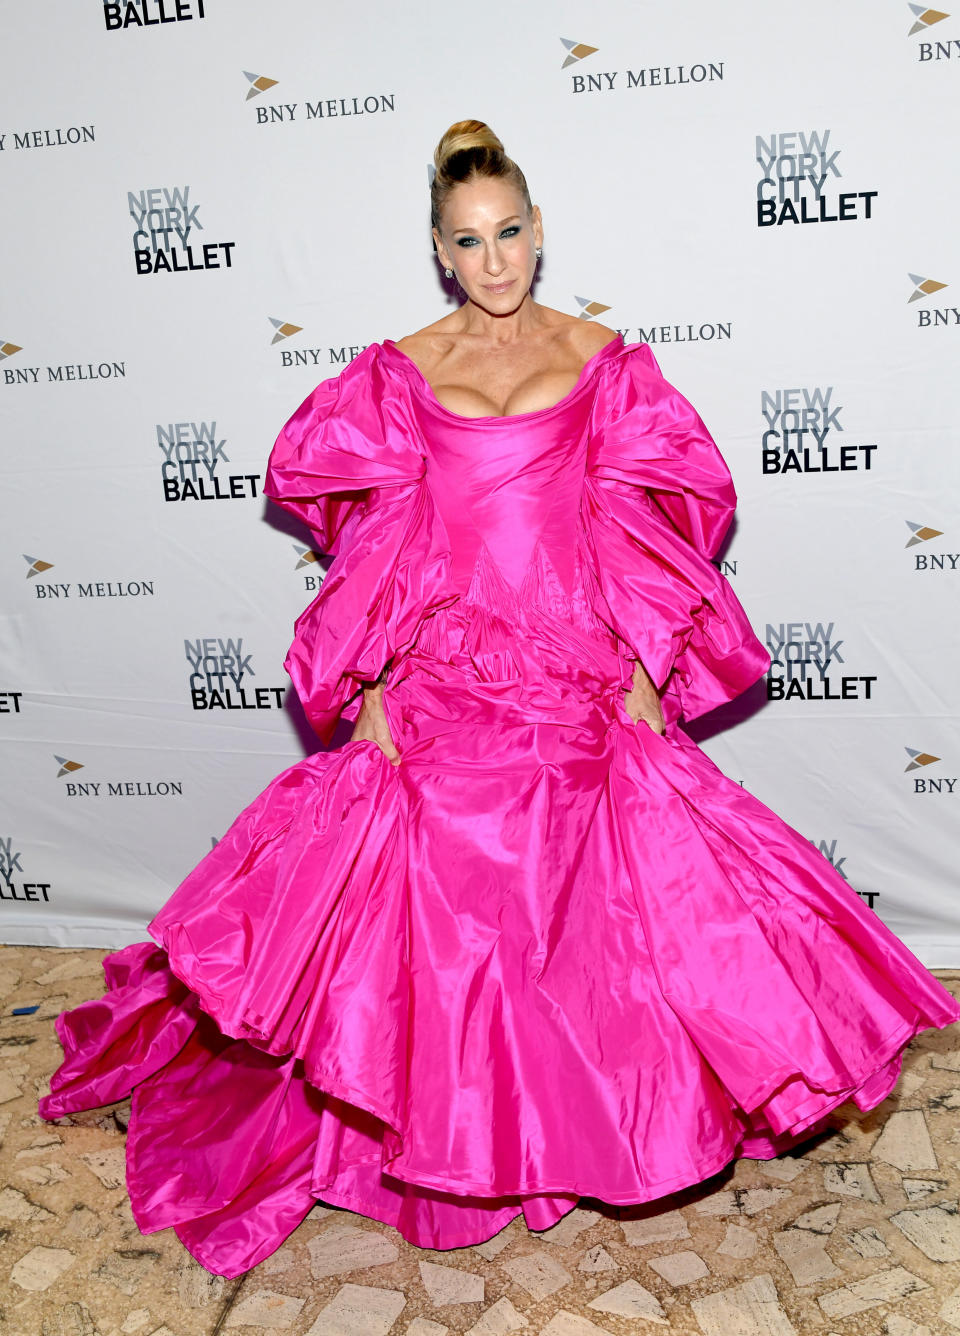 Sarah Jessica Parker at the eighth annual New York City Ballet fall fashion gala in New York on Sept. 26, 2019.